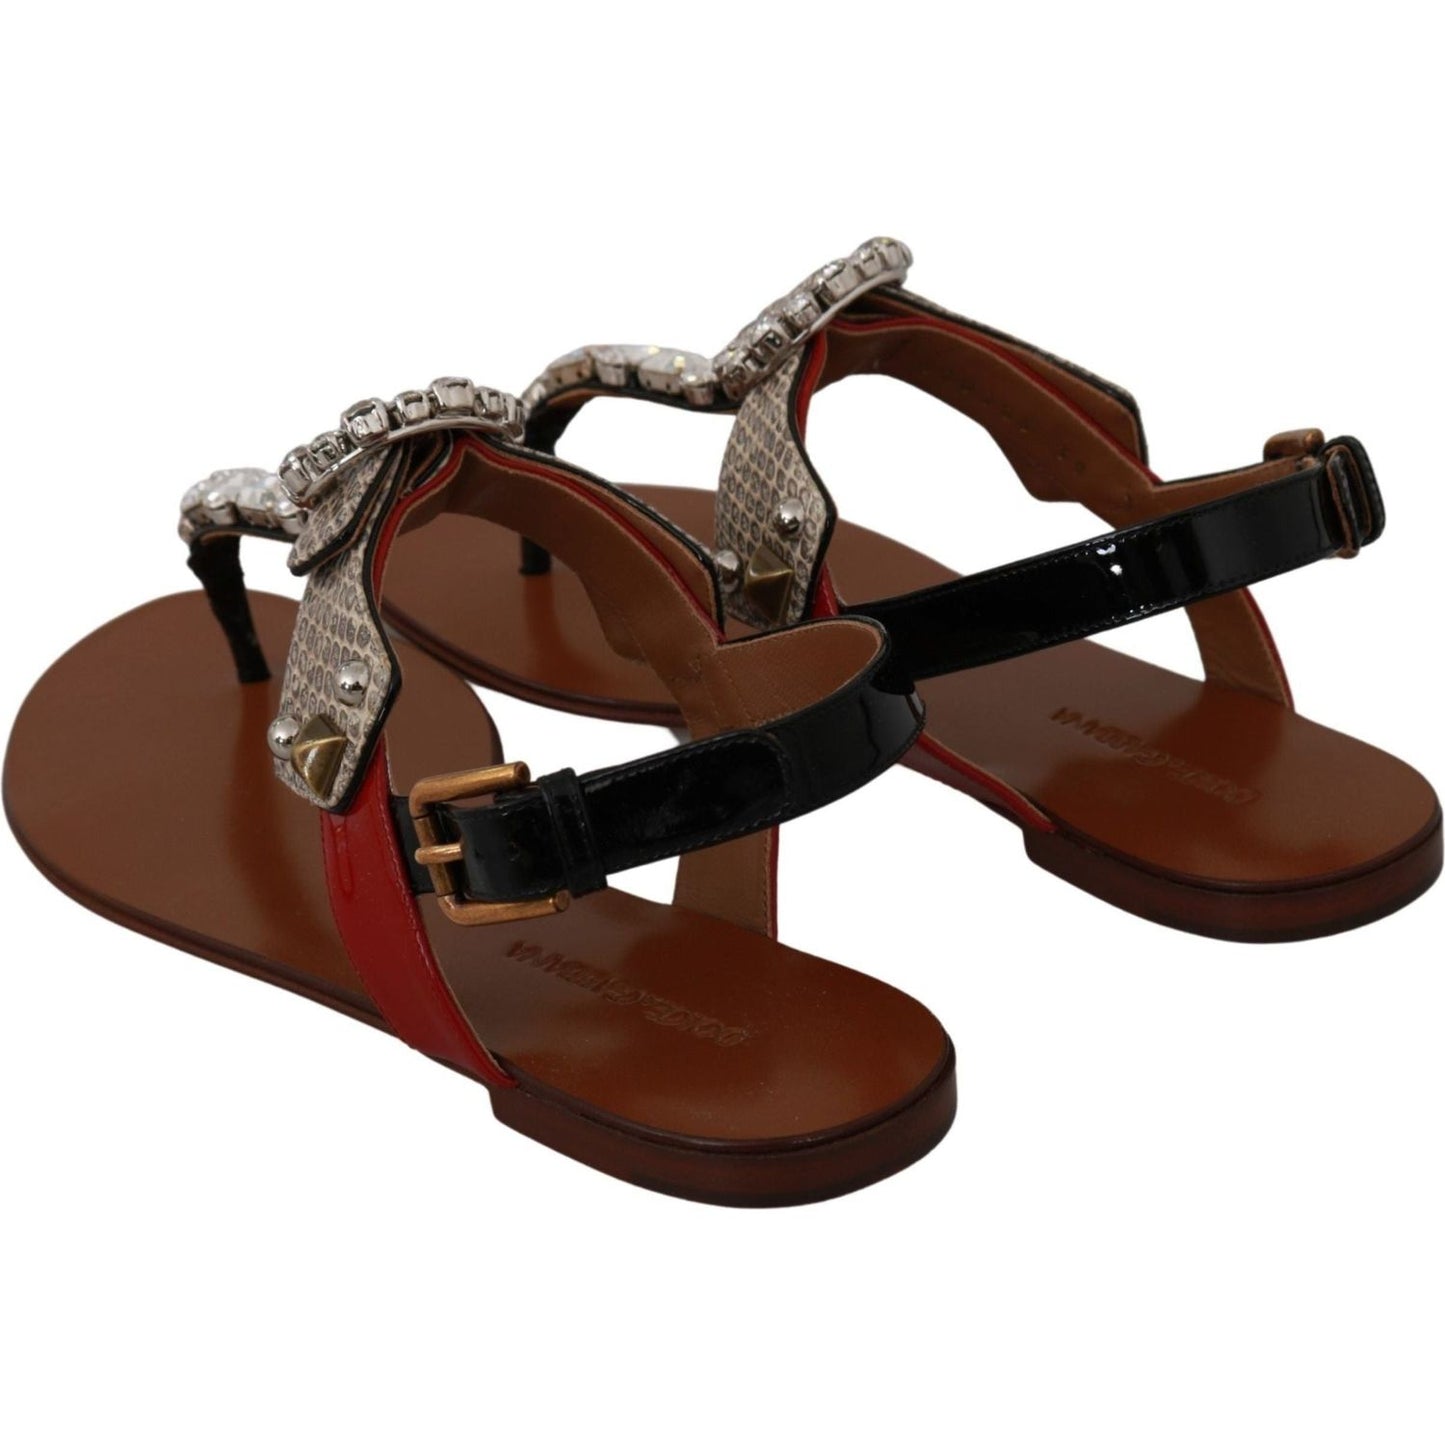 Dolce & Gabbana Elegant Strappy Sandals with Exotic Charm leather-ayers-crystal-sandals-flip-flops-shoes